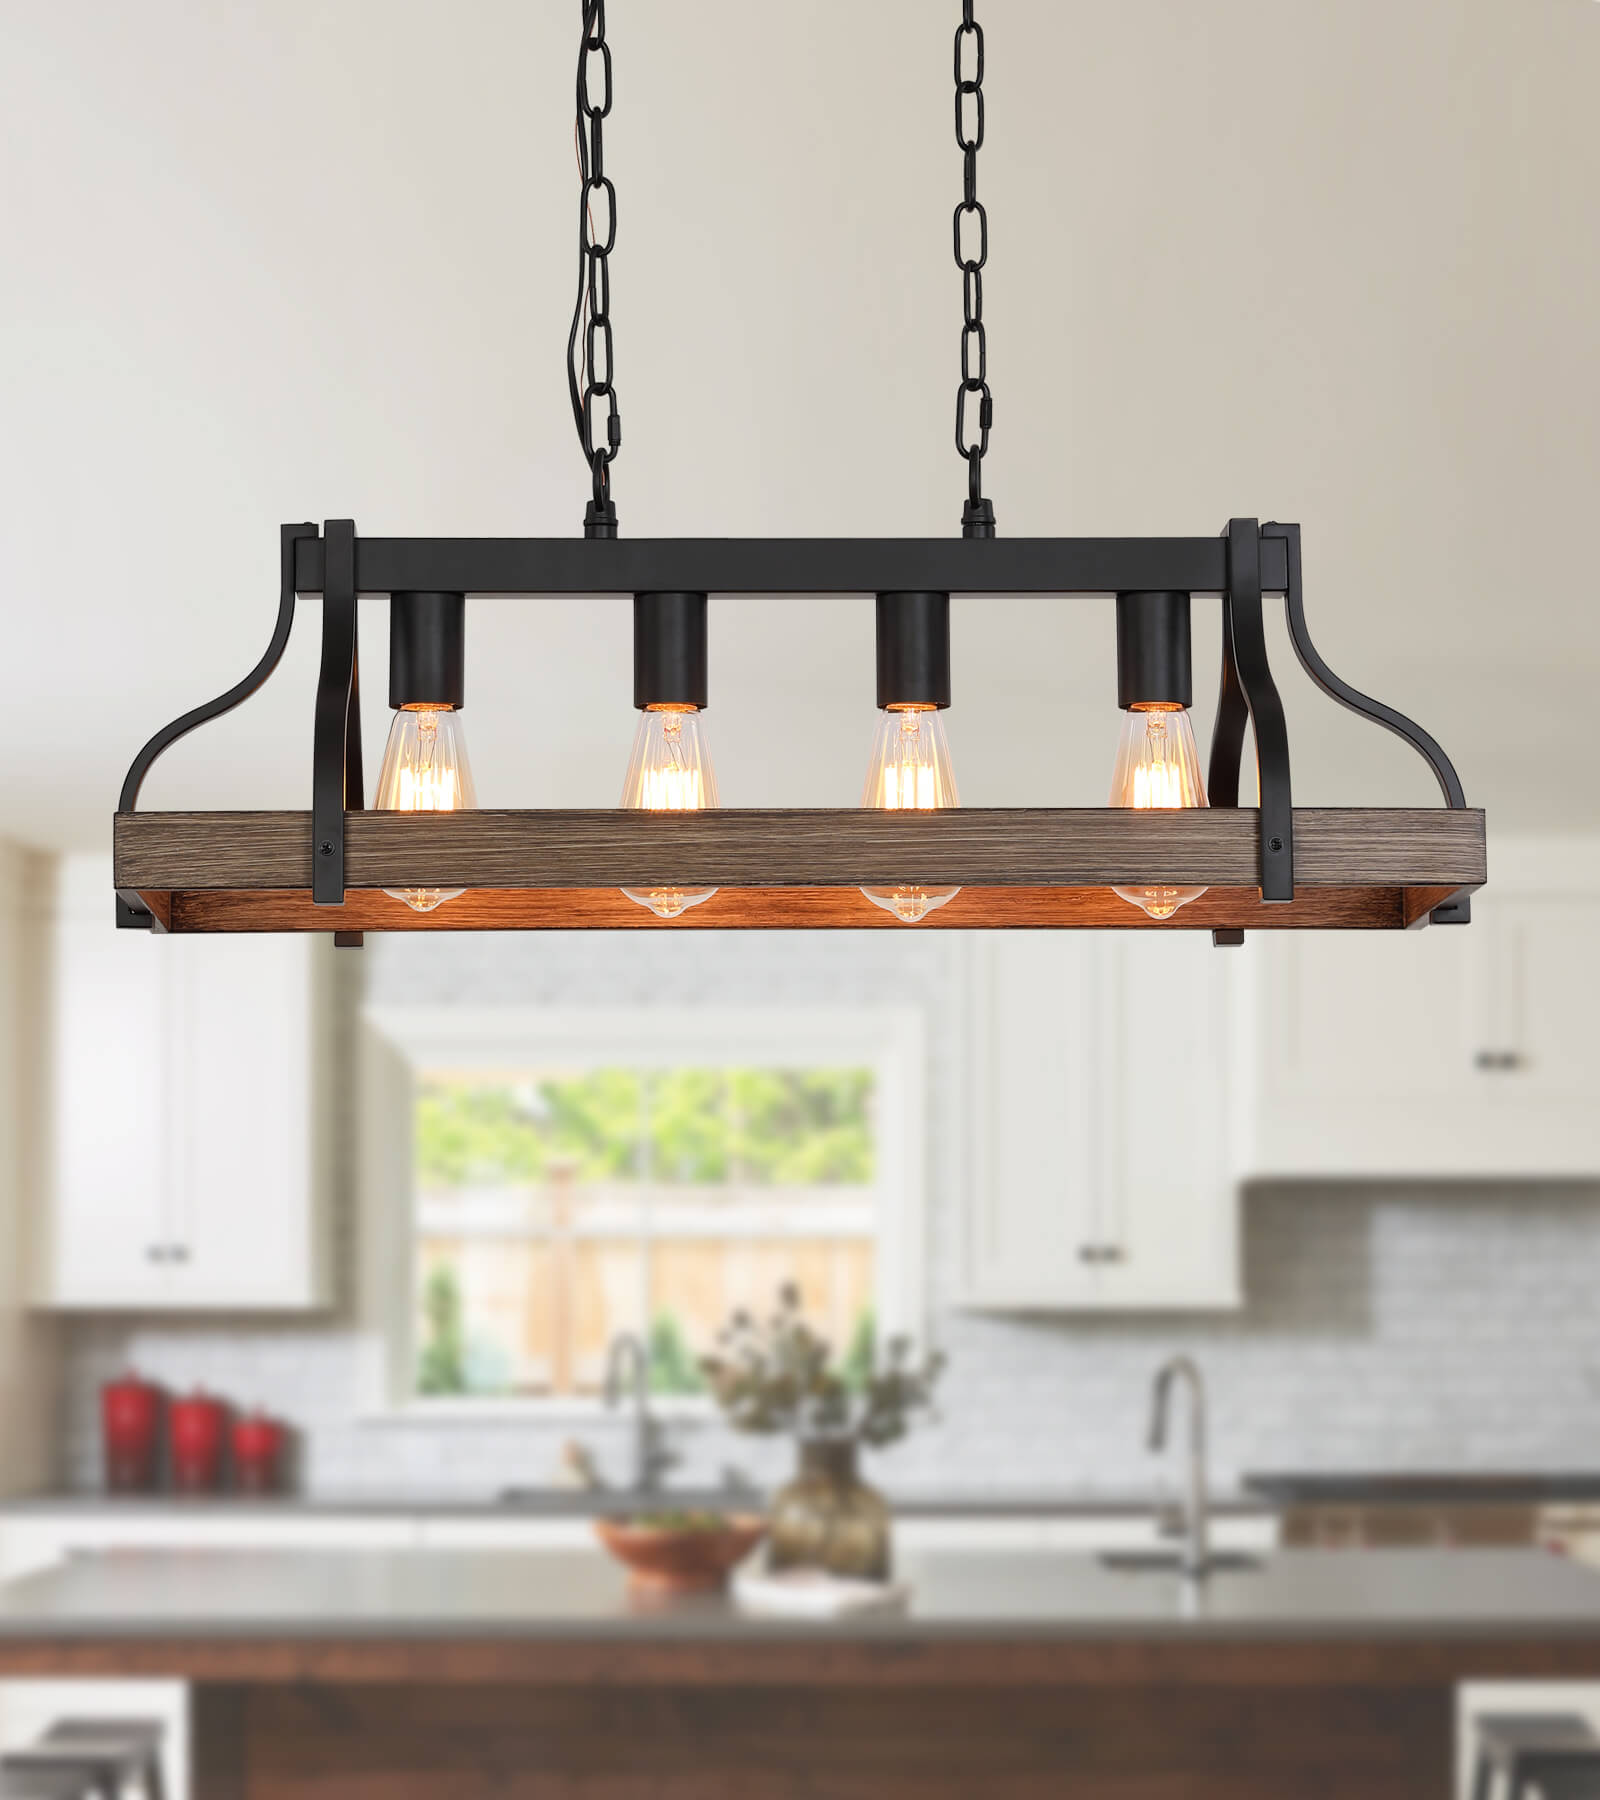 Modern Farmhouse Rustic Linear Chandelier Pendant Light For Dining Room Kitchen Island